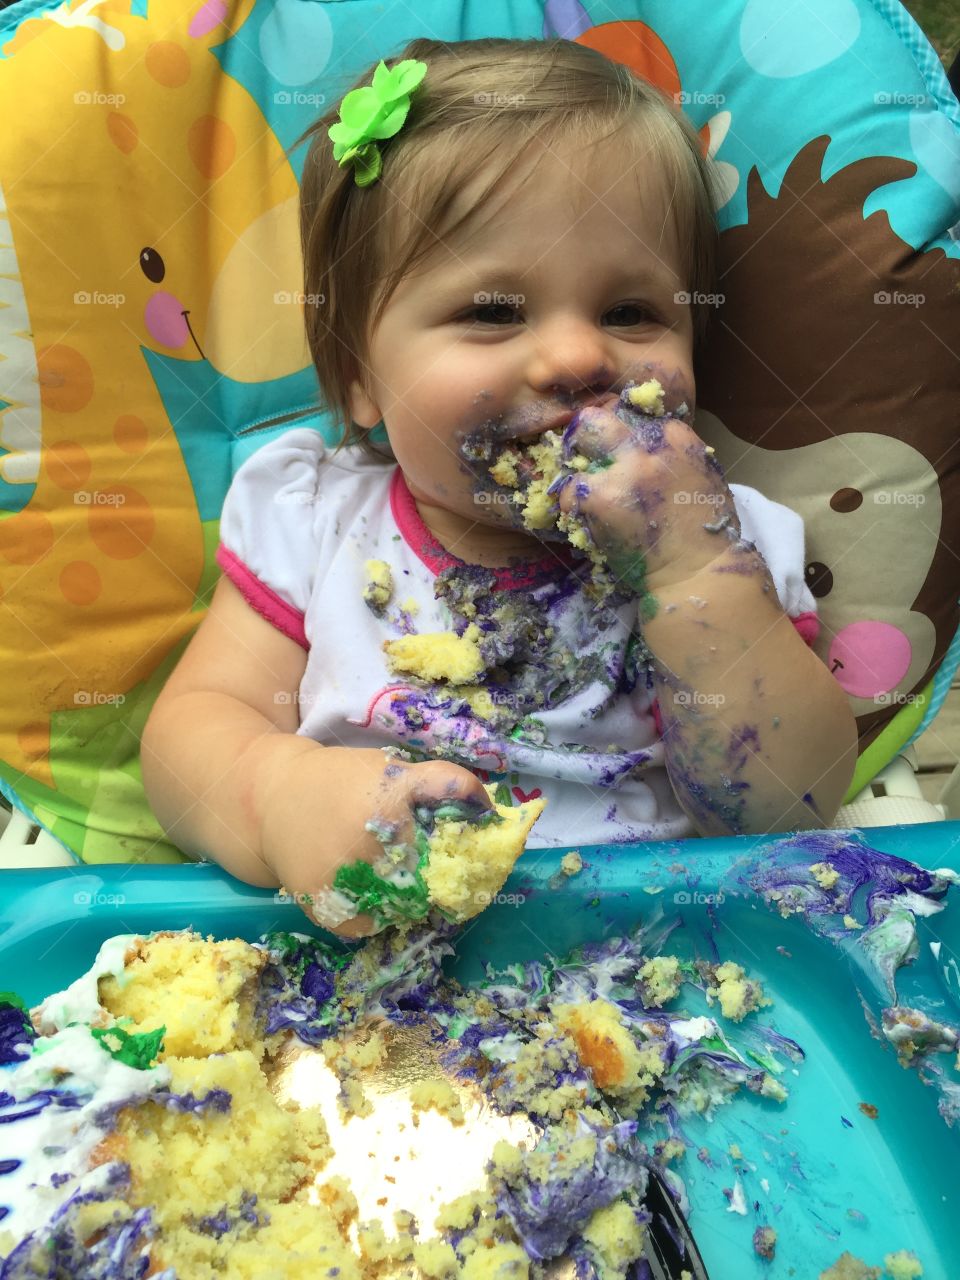 Adorable girl with messy face while eating cake